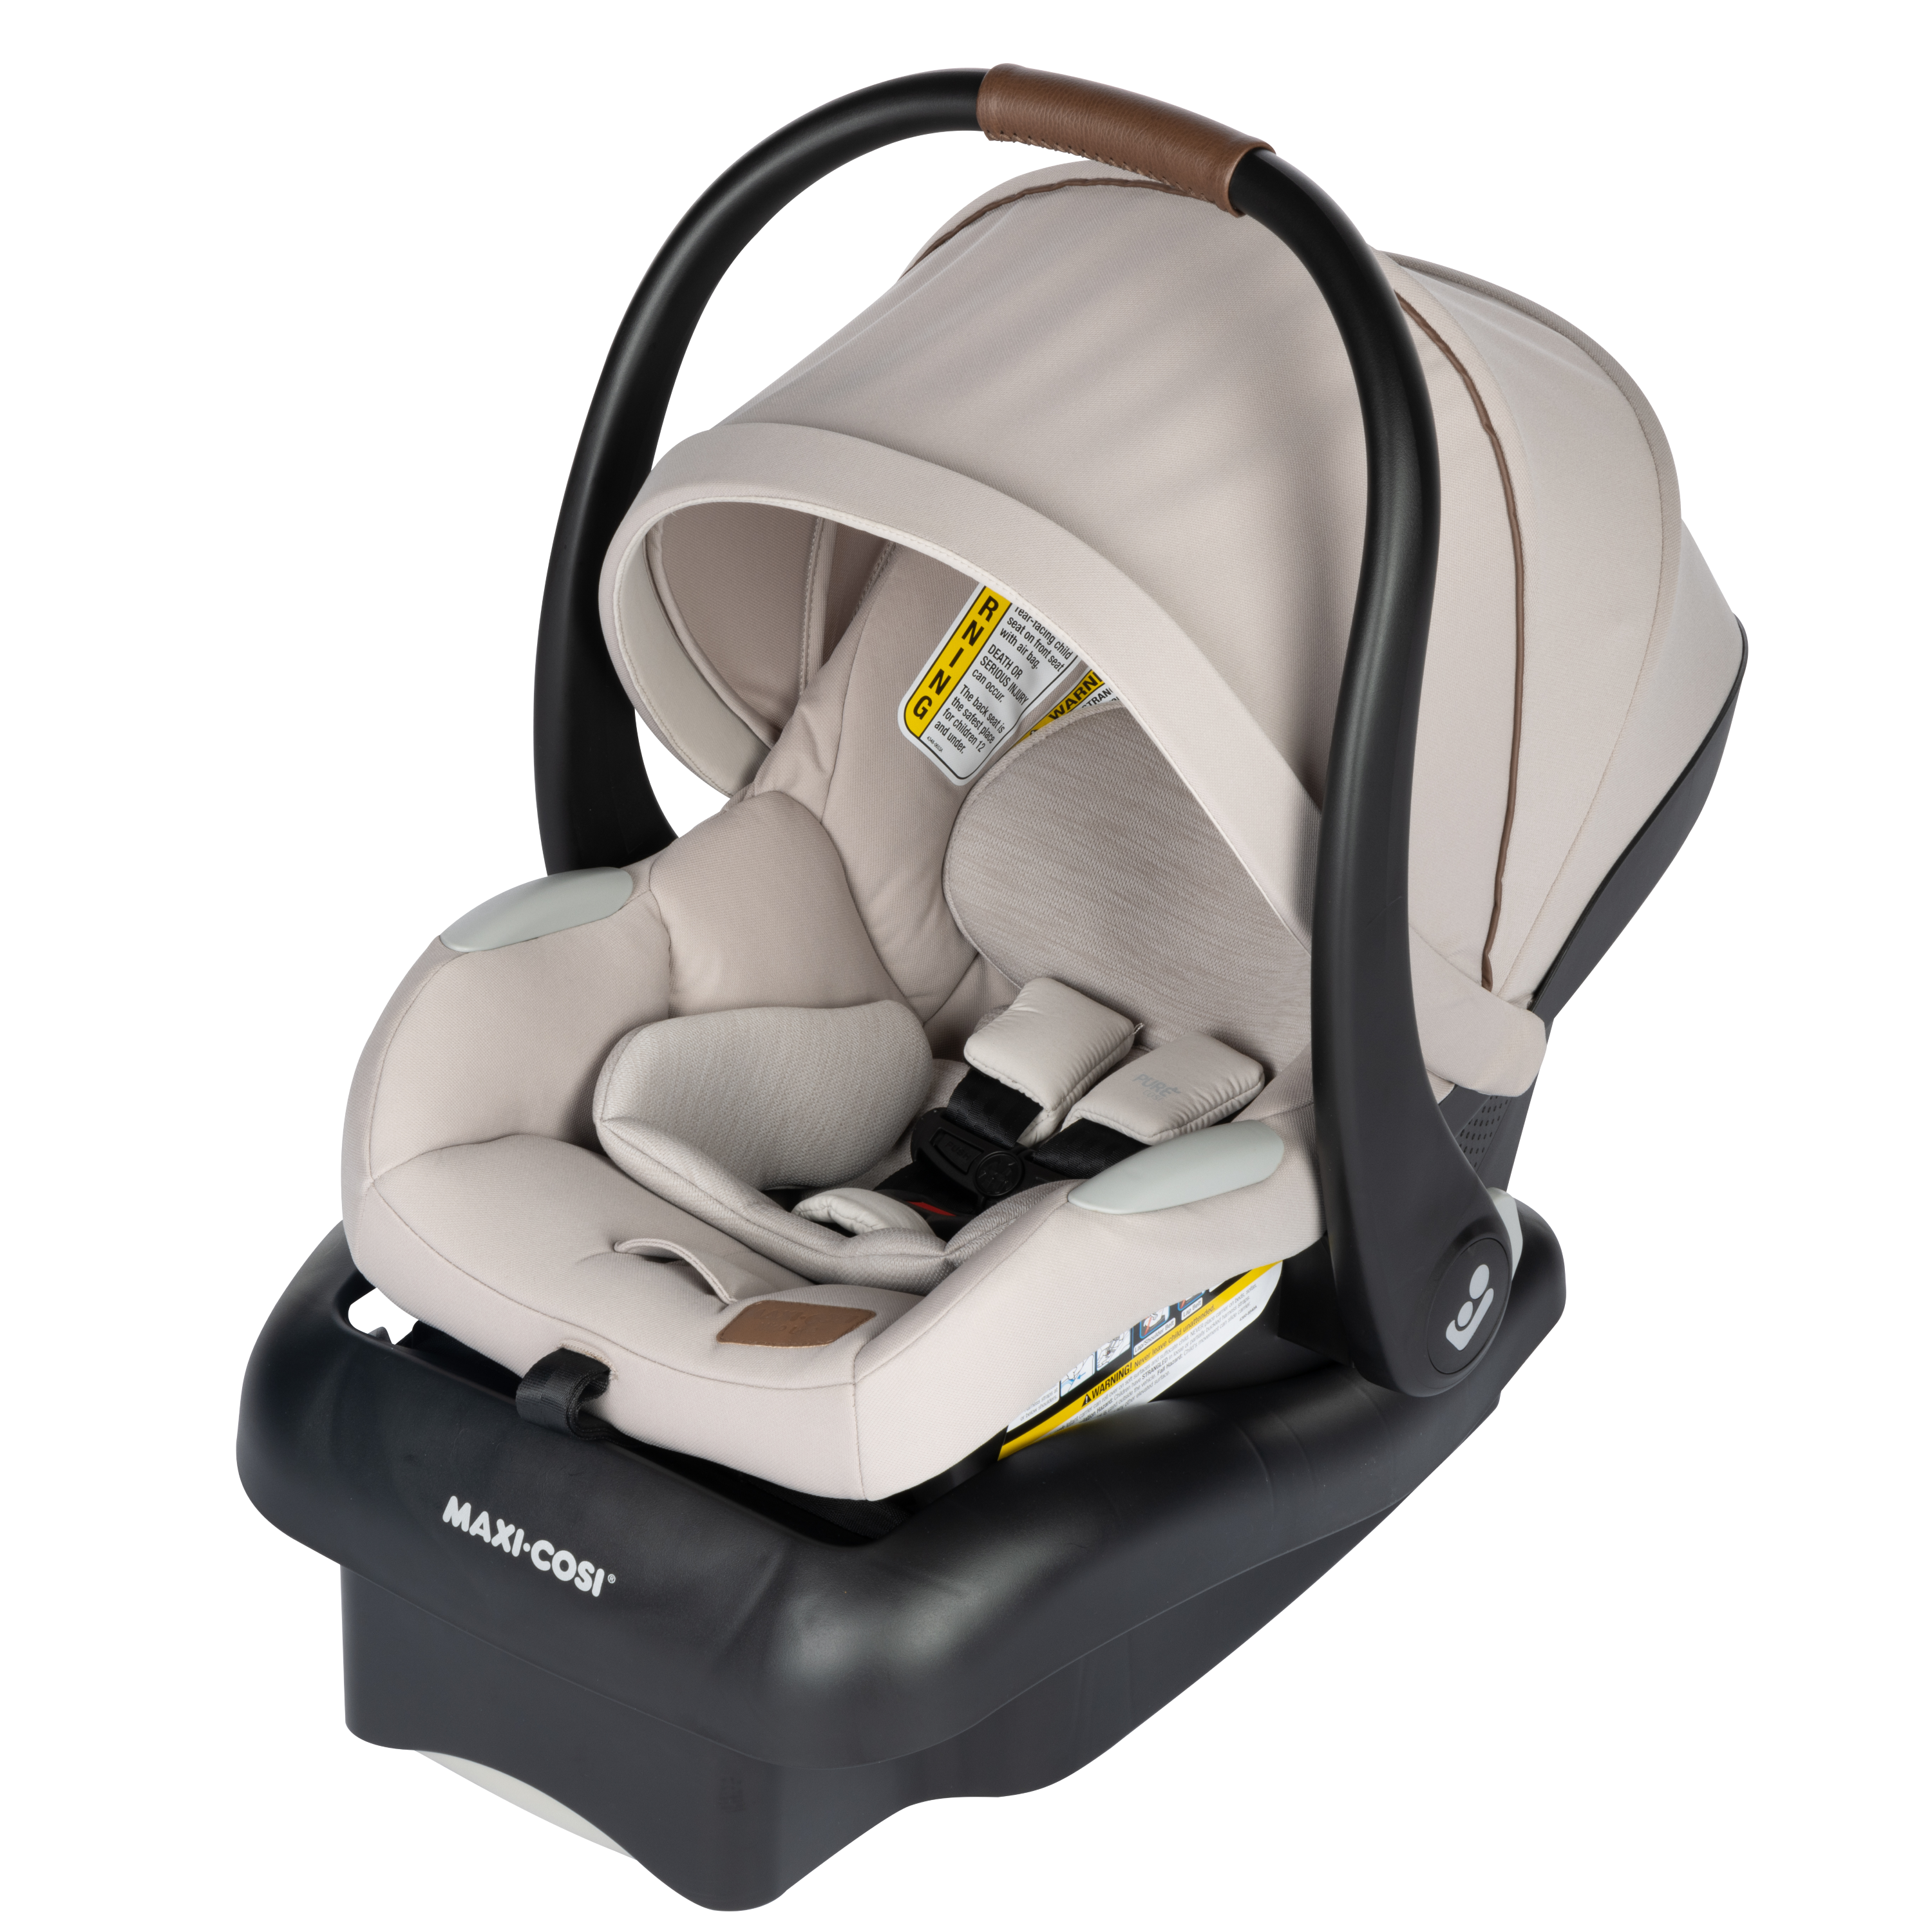 Mico™ Luxe Infant Car Seat - New Hope Tan - 45 degree angle view of left side